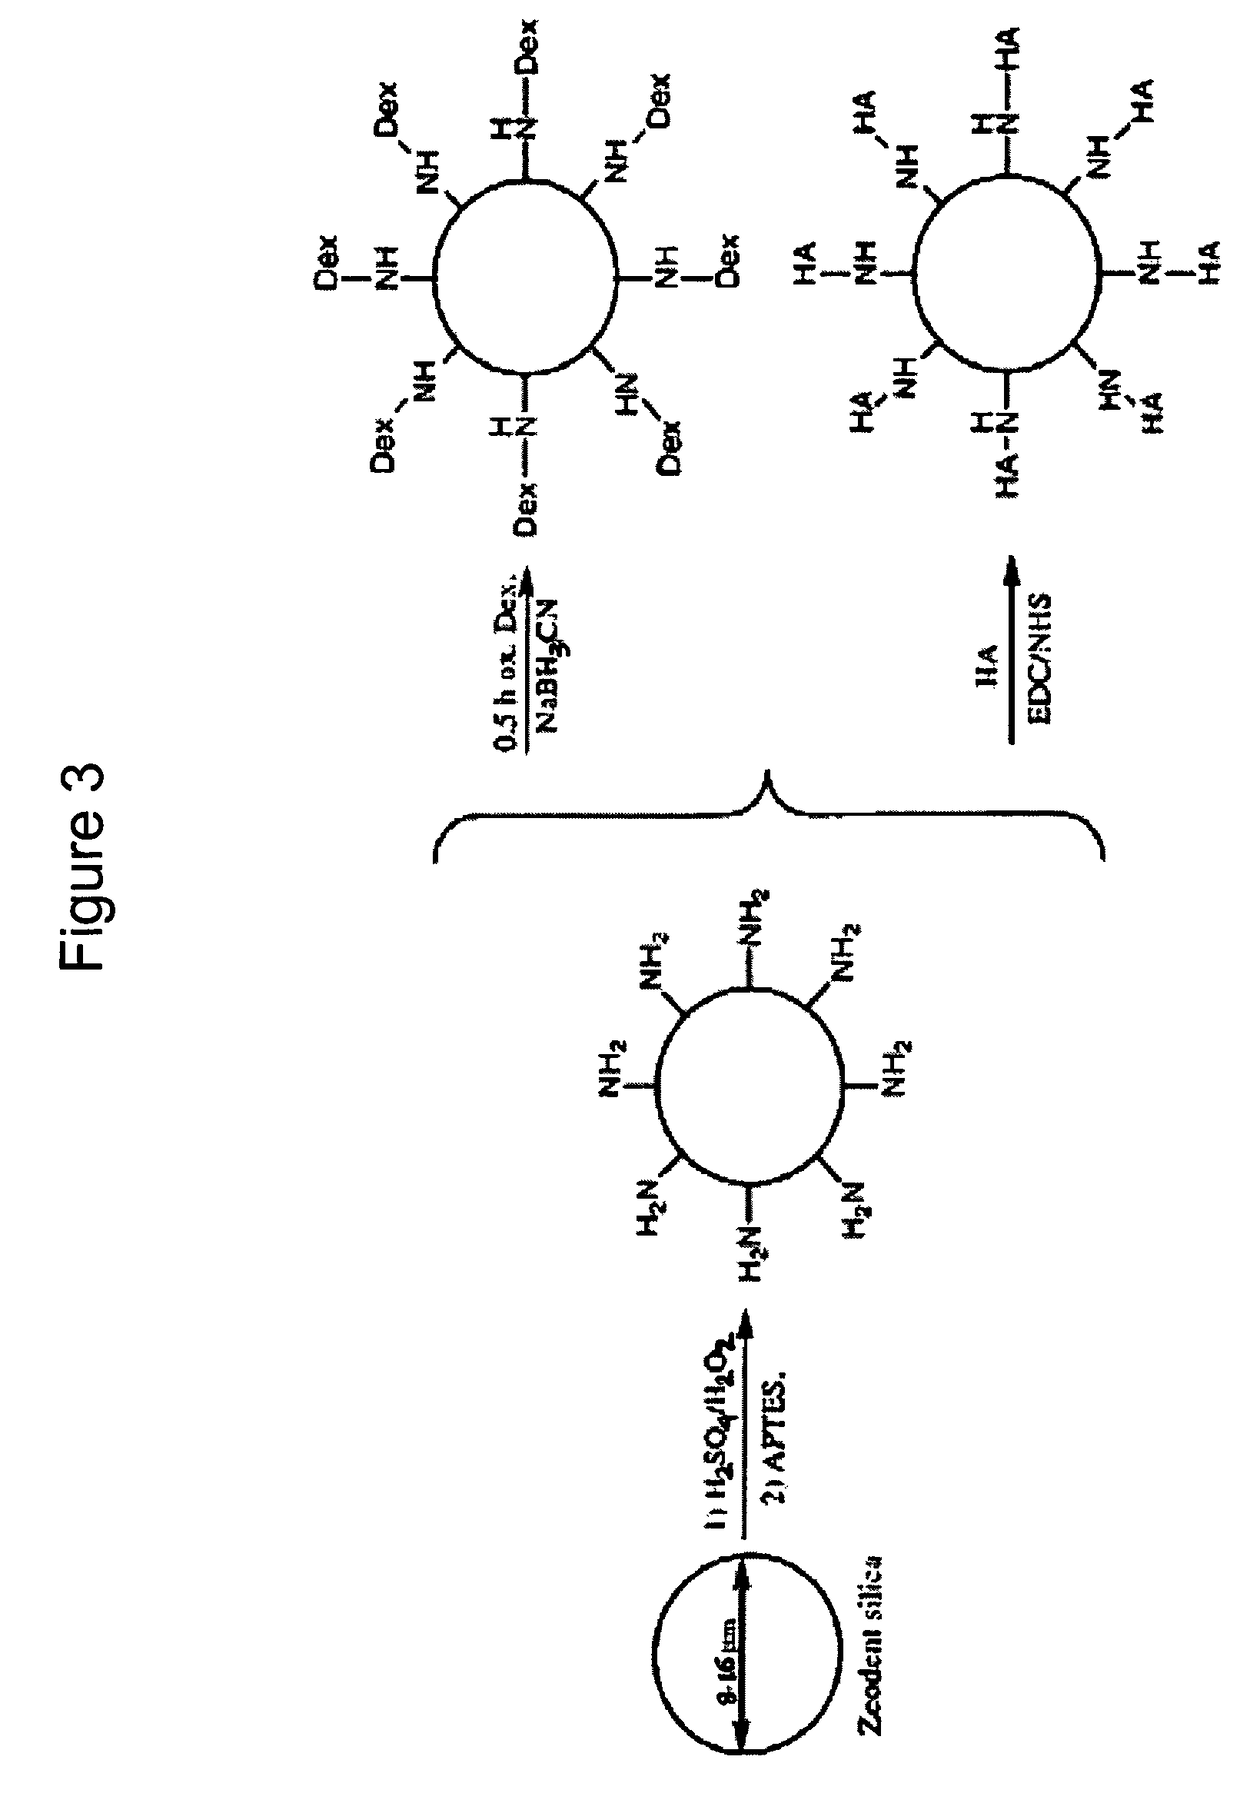 Particles that disrupt or impede bacterial adhesion, related compositions and methods